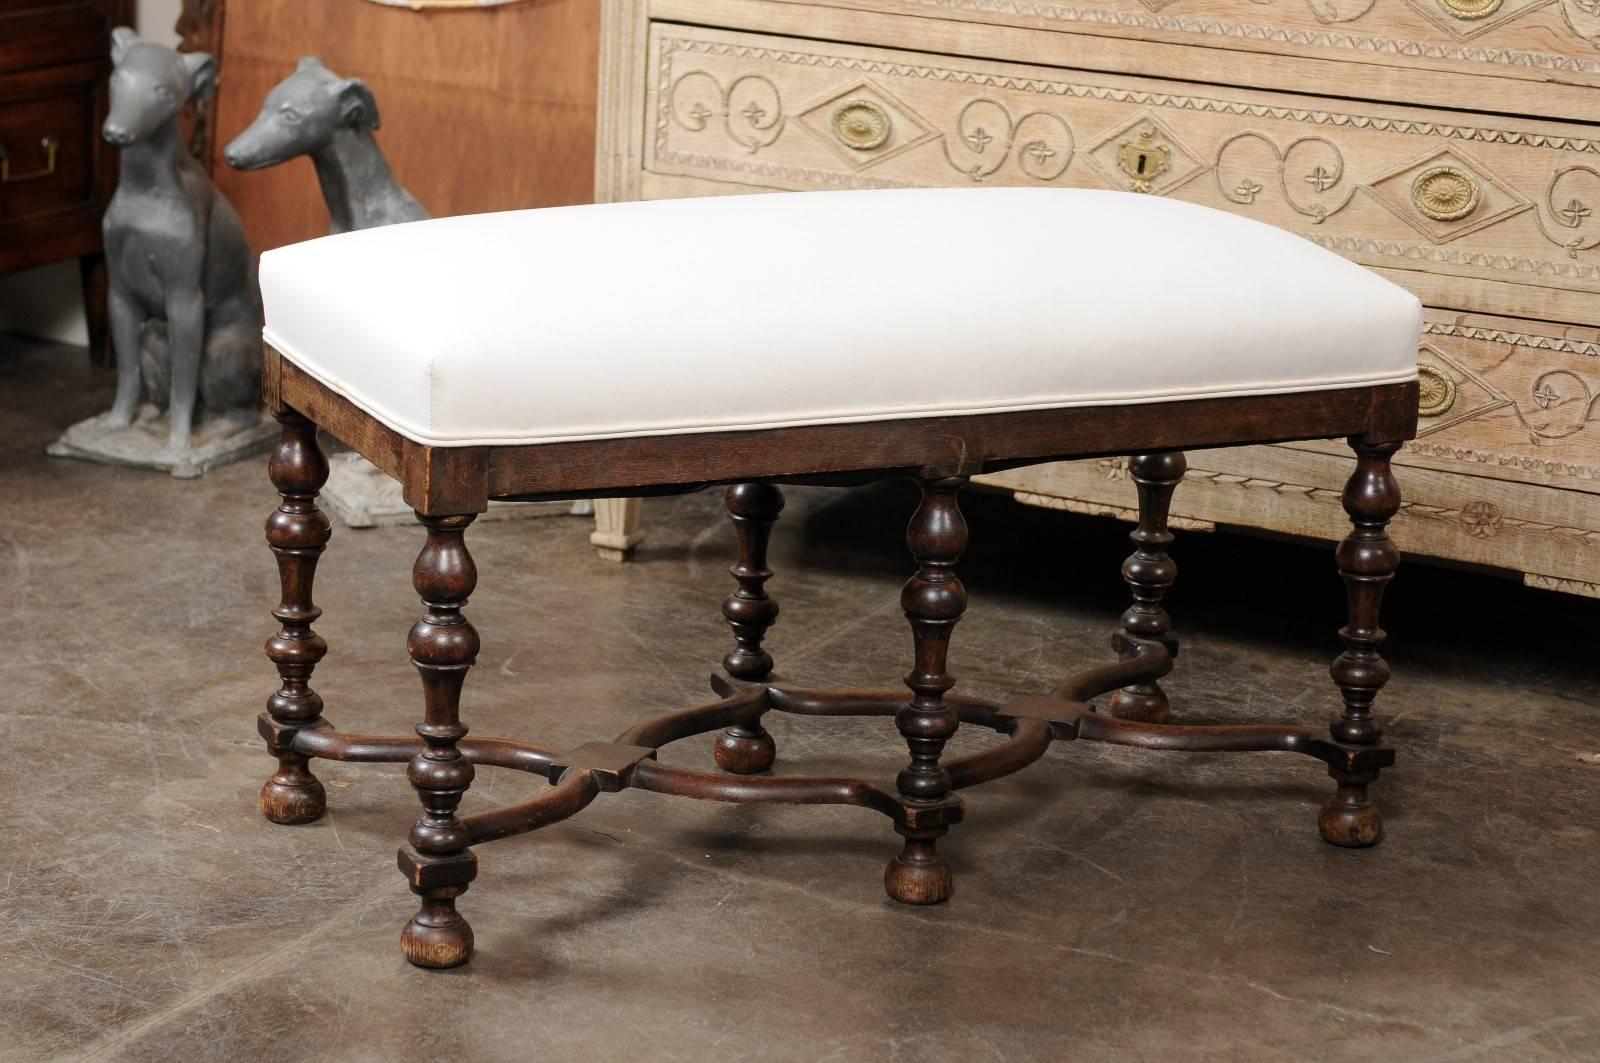 This French Louis XIII style oak backless bench from the late 19th century features a rectangular smooth muslin upholstered seat over six exquisite turned legs. These legs are connected to one another through curved X-shaped stretchers with diamond